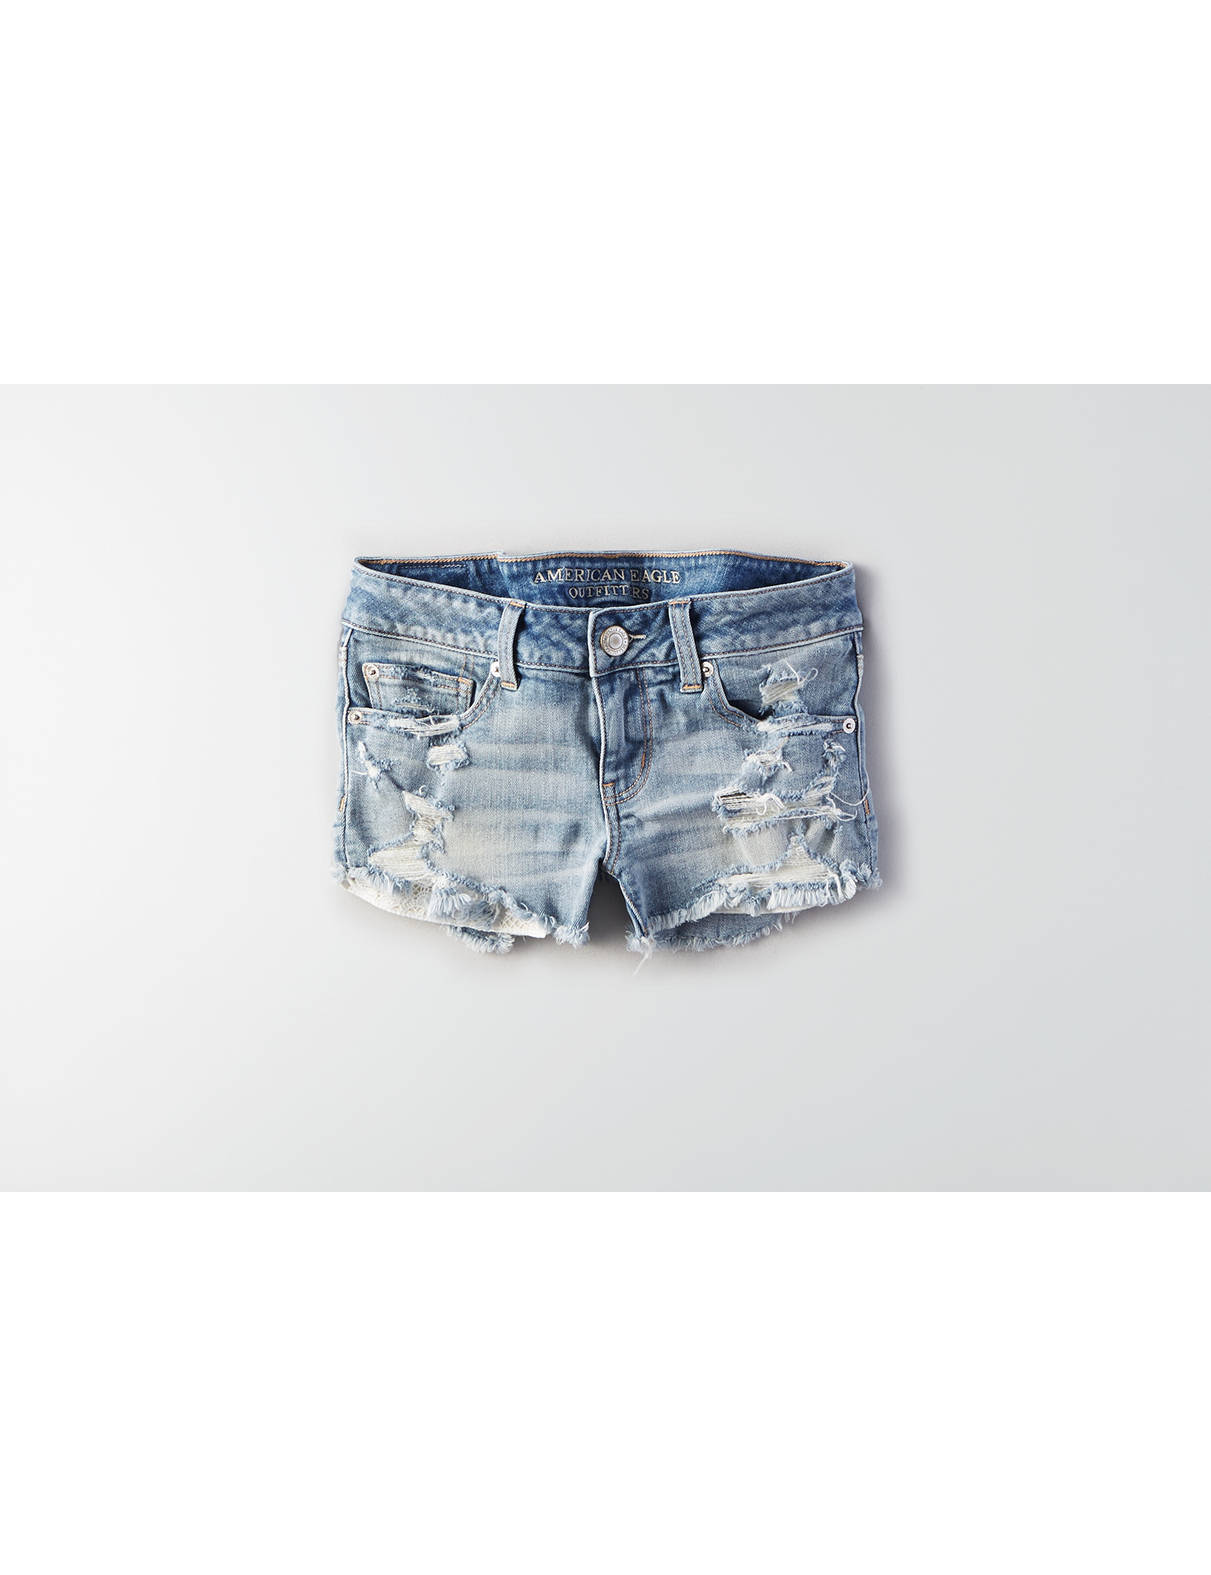 Women's Shorts | American Eagle Outfitters